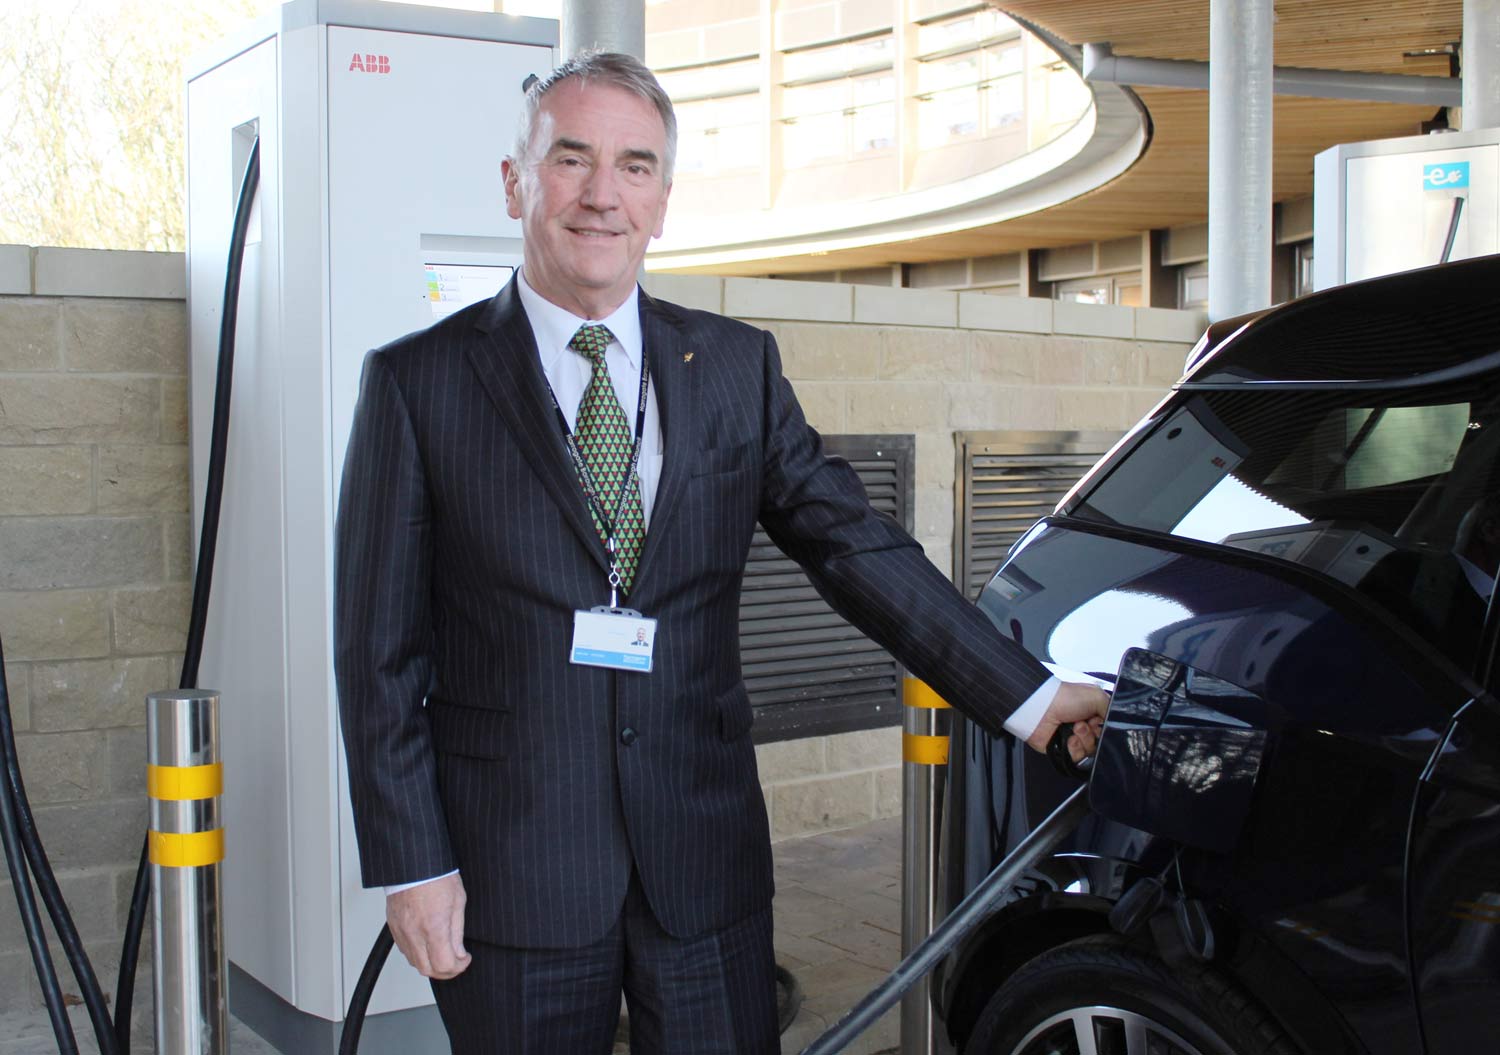 Councillor Phil Ireland, Harrogate Borough Council’s cabinet member for sustainable transport, tries out one of the three new rapid electric car chargers for public use at the council’s civic centre